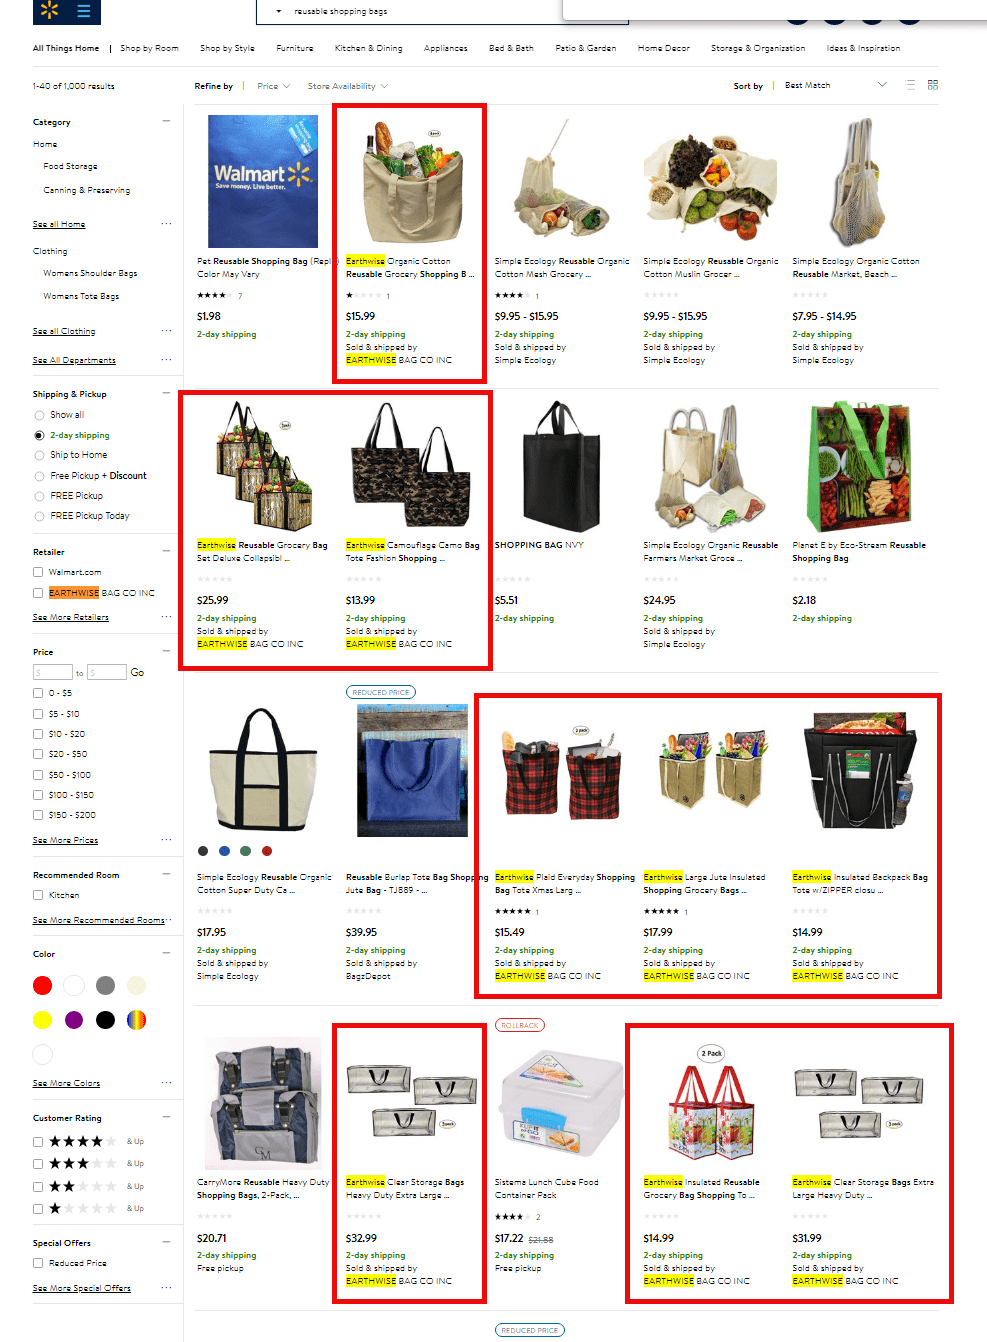 Search result dominance from Earthwise Bags